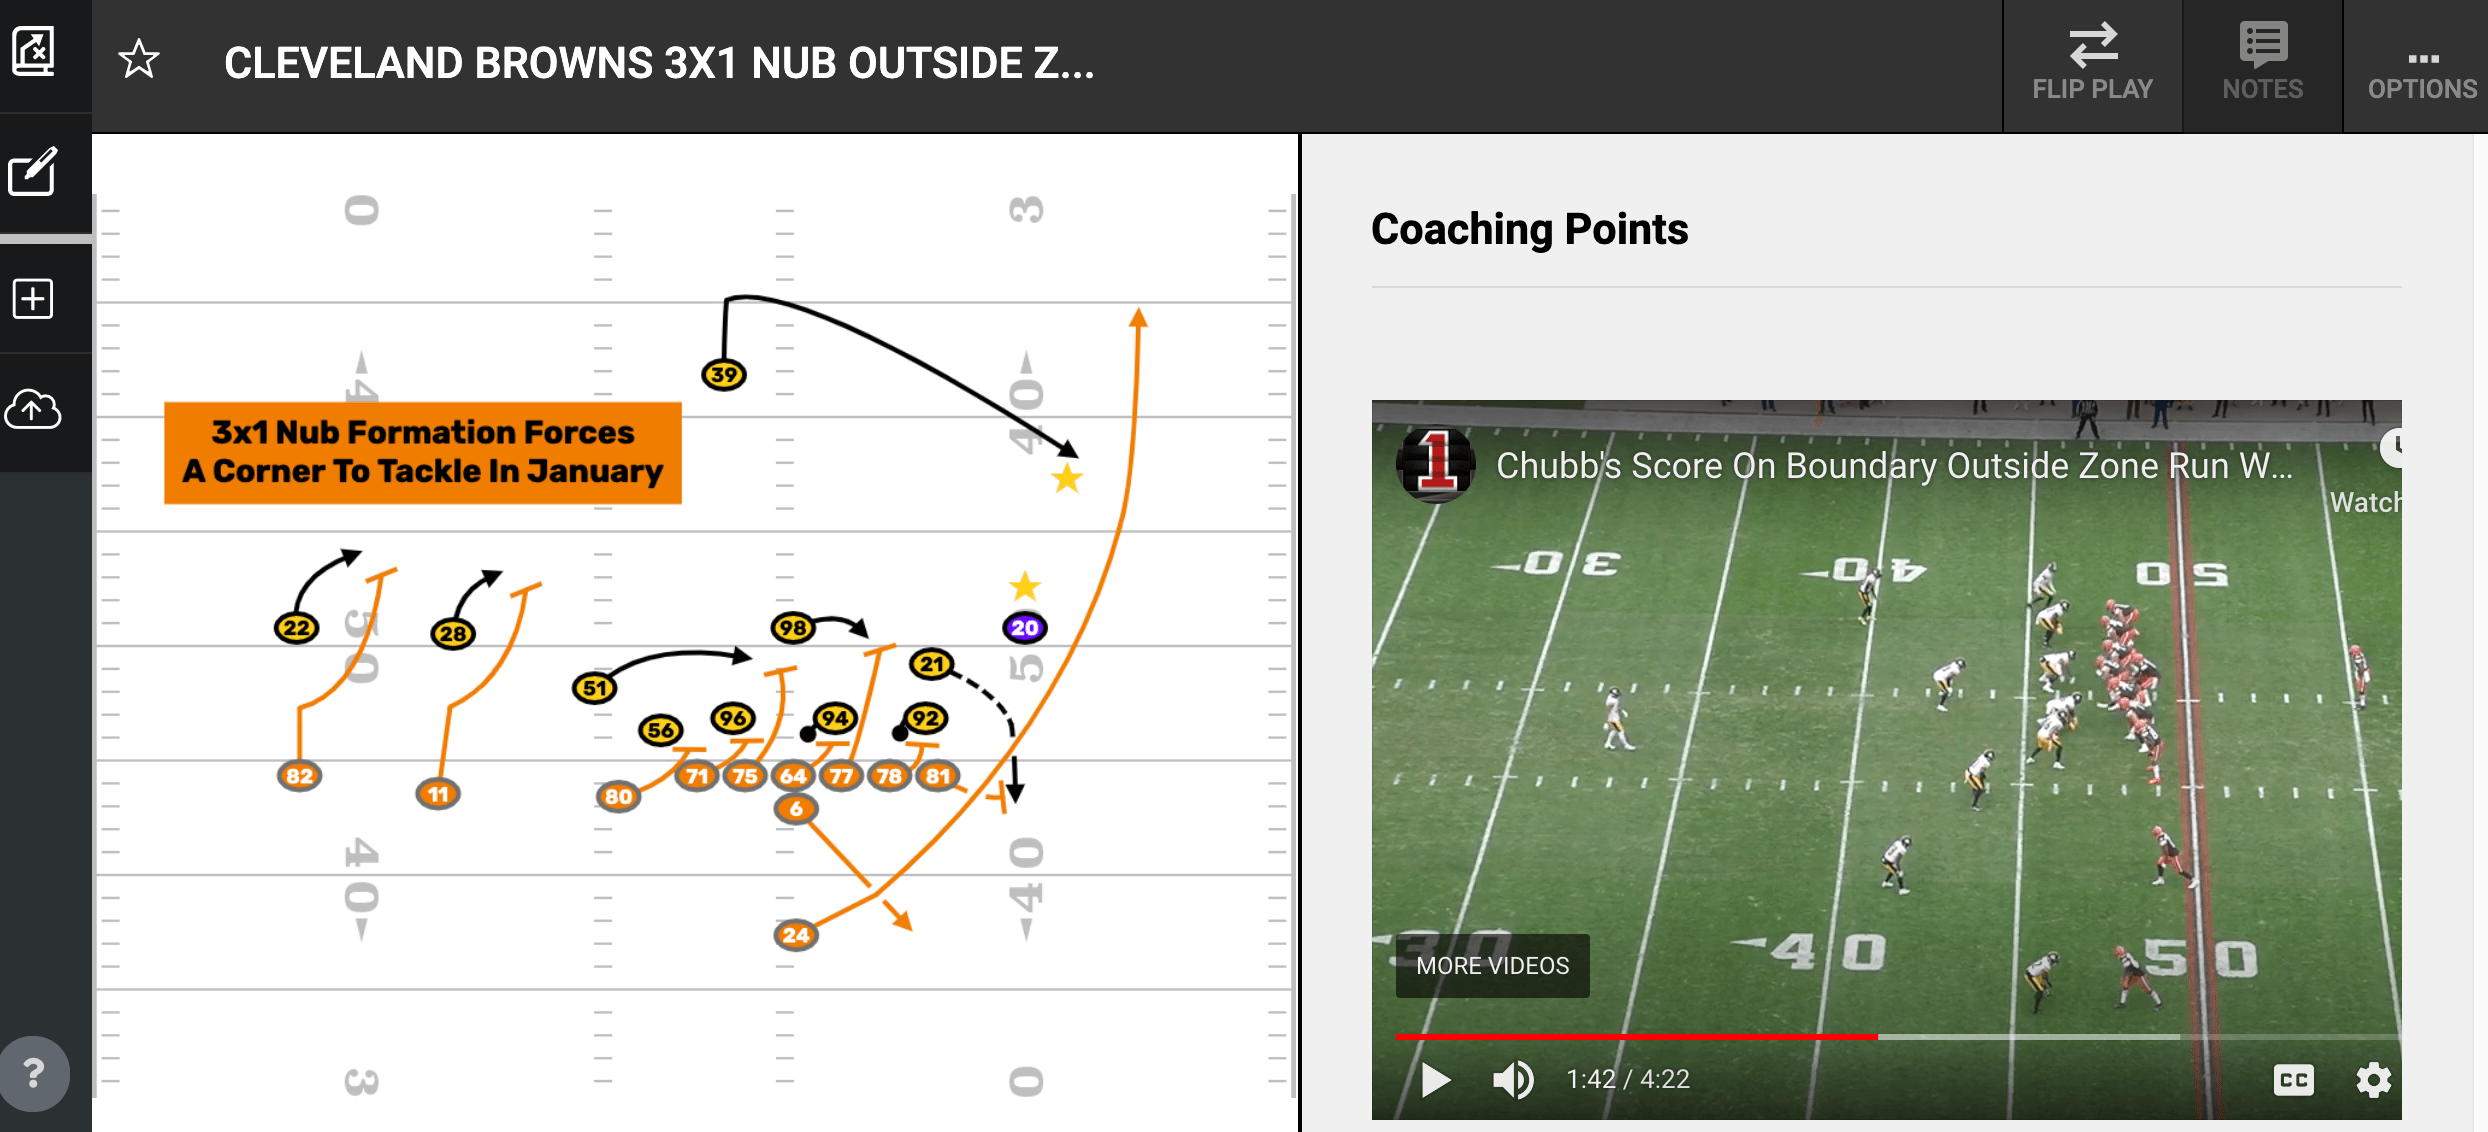 Browns Used Personnel & Formation To Get This Matchup